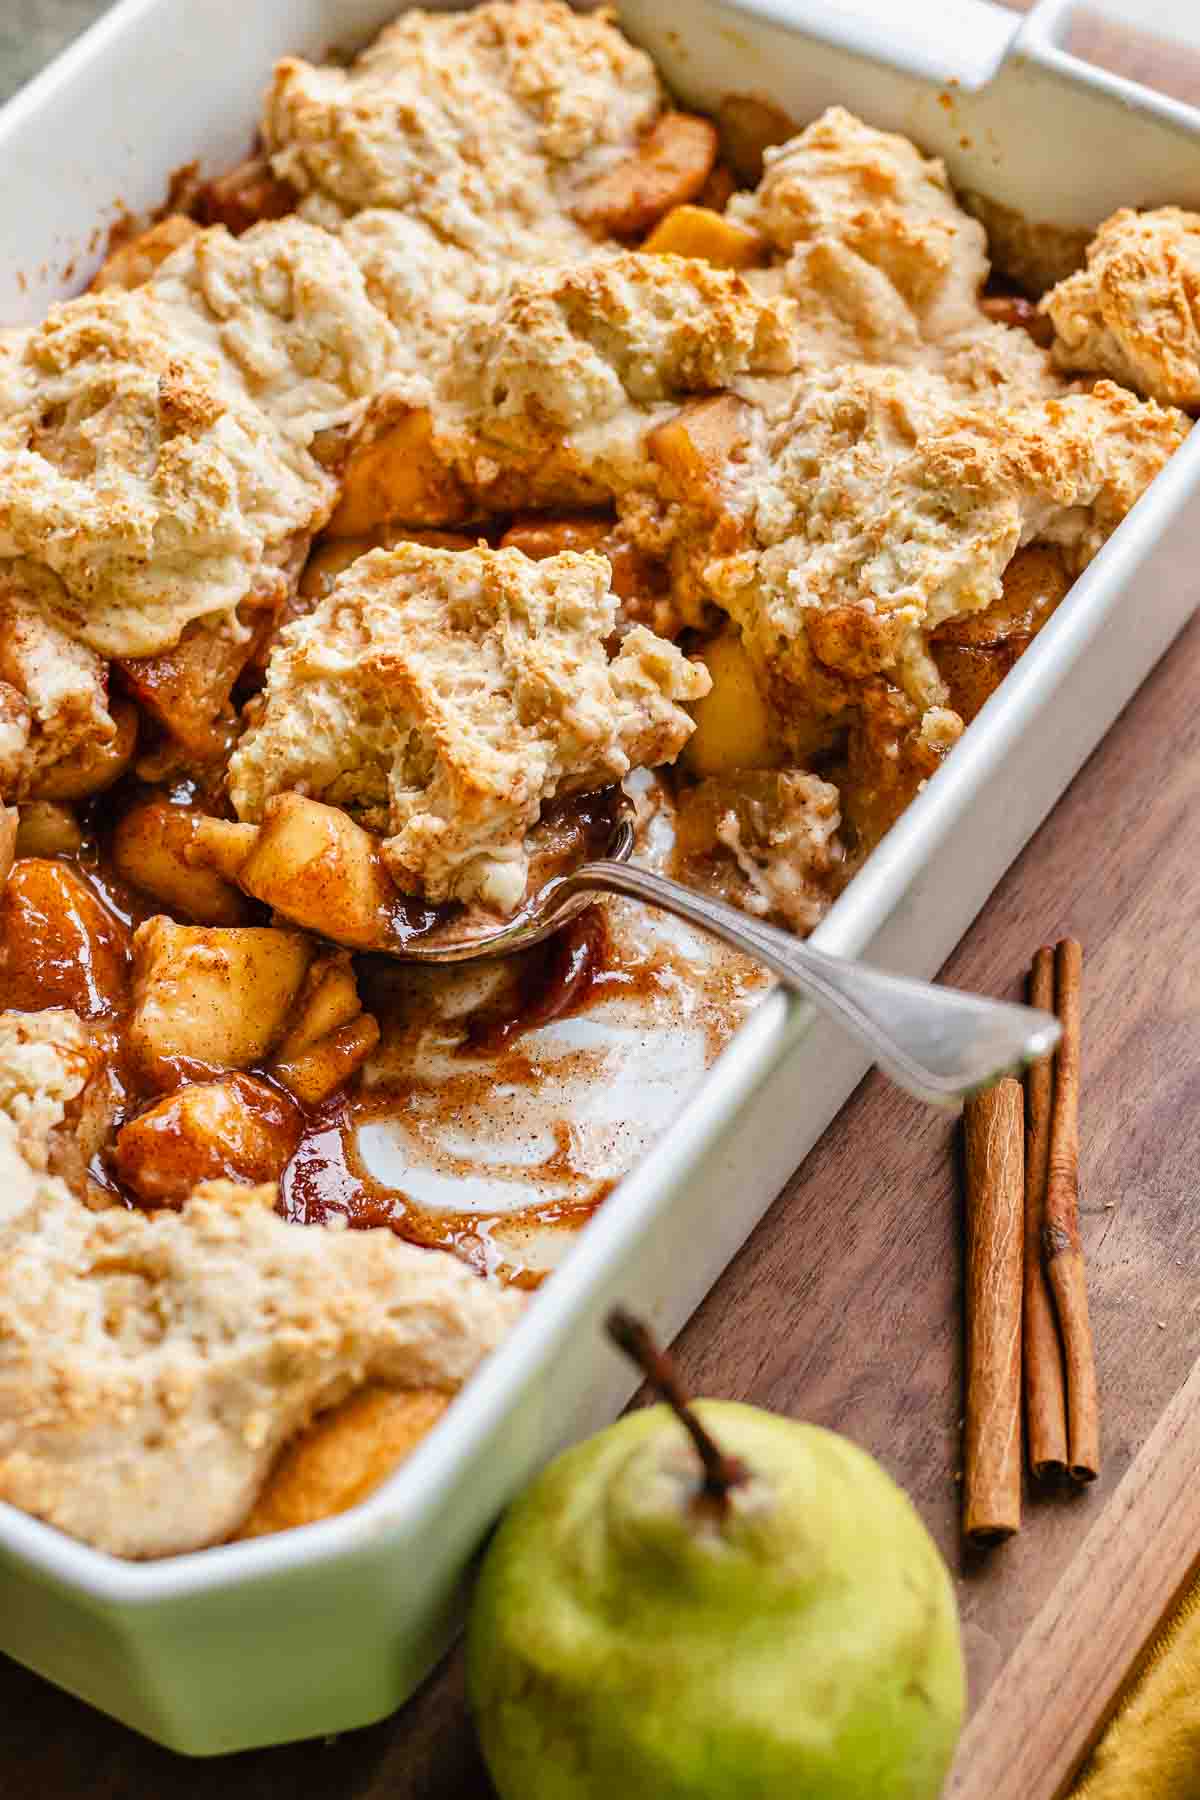 A spoon sits in a casserole dish with a scoop of pear cobbler in it.